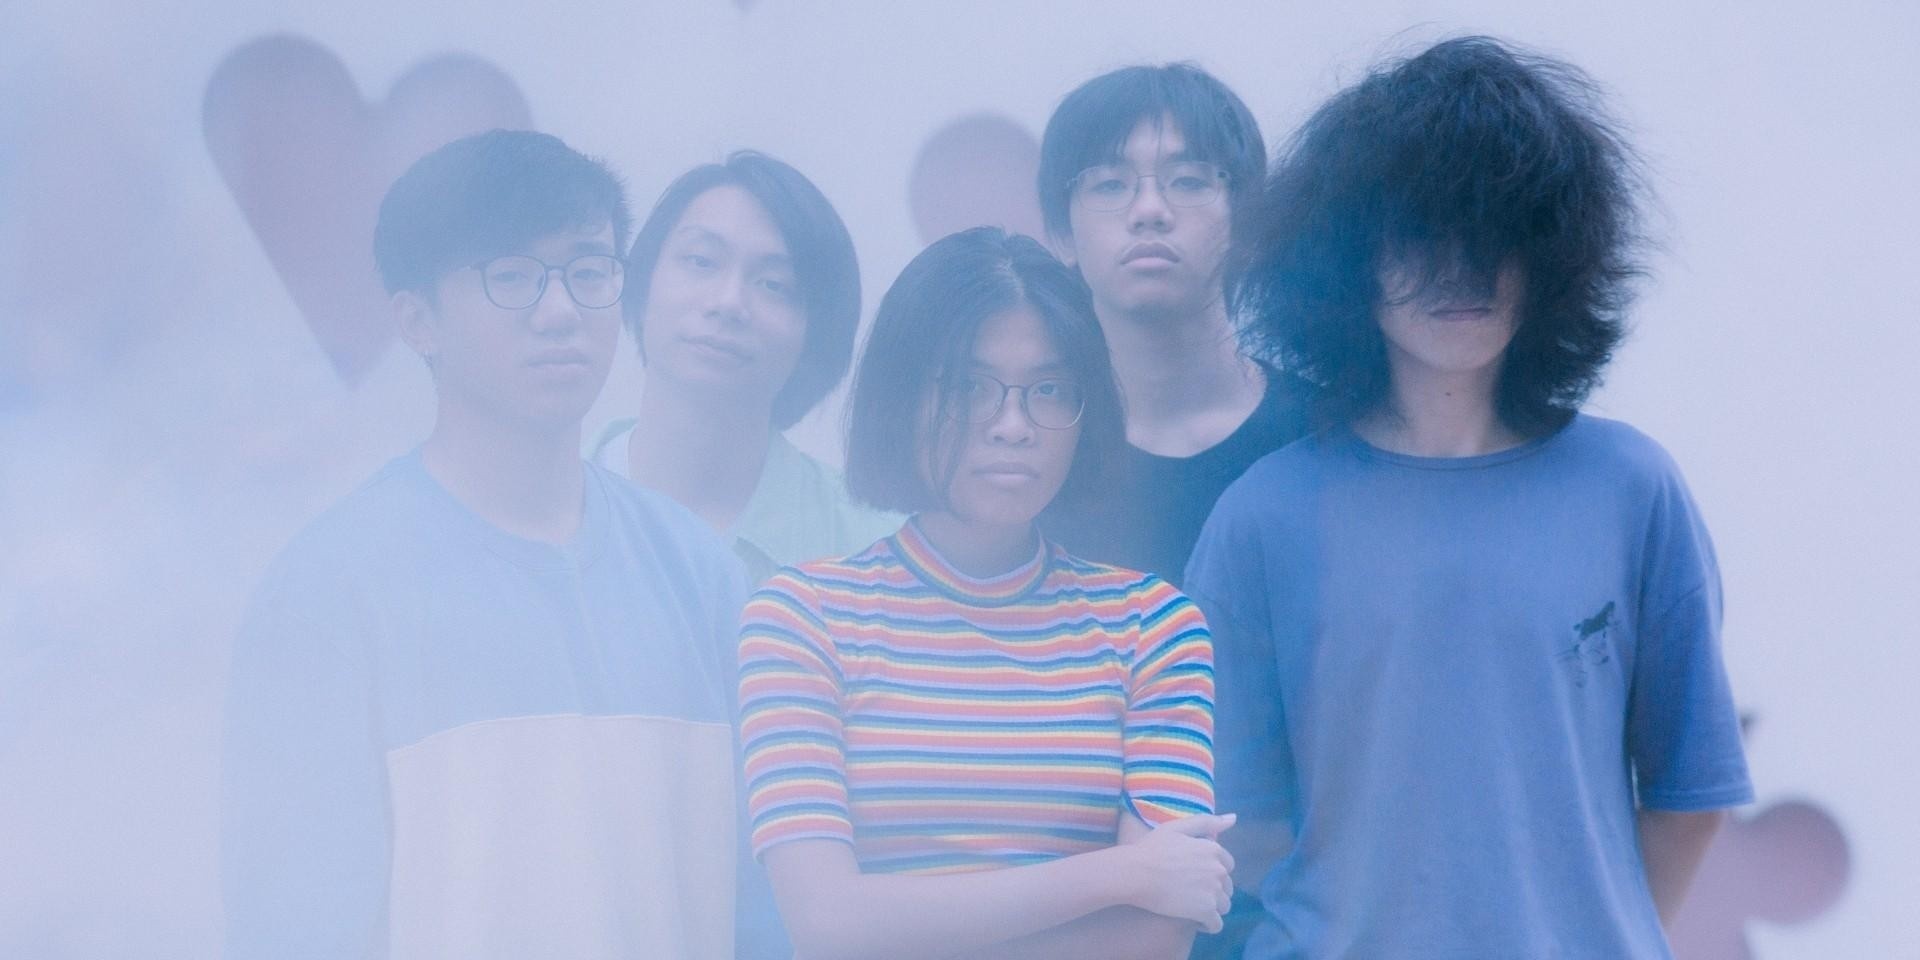 Subsonic Eye announce Dive Into album launch with Fauxe, Coming Up Roses, Sobs and more